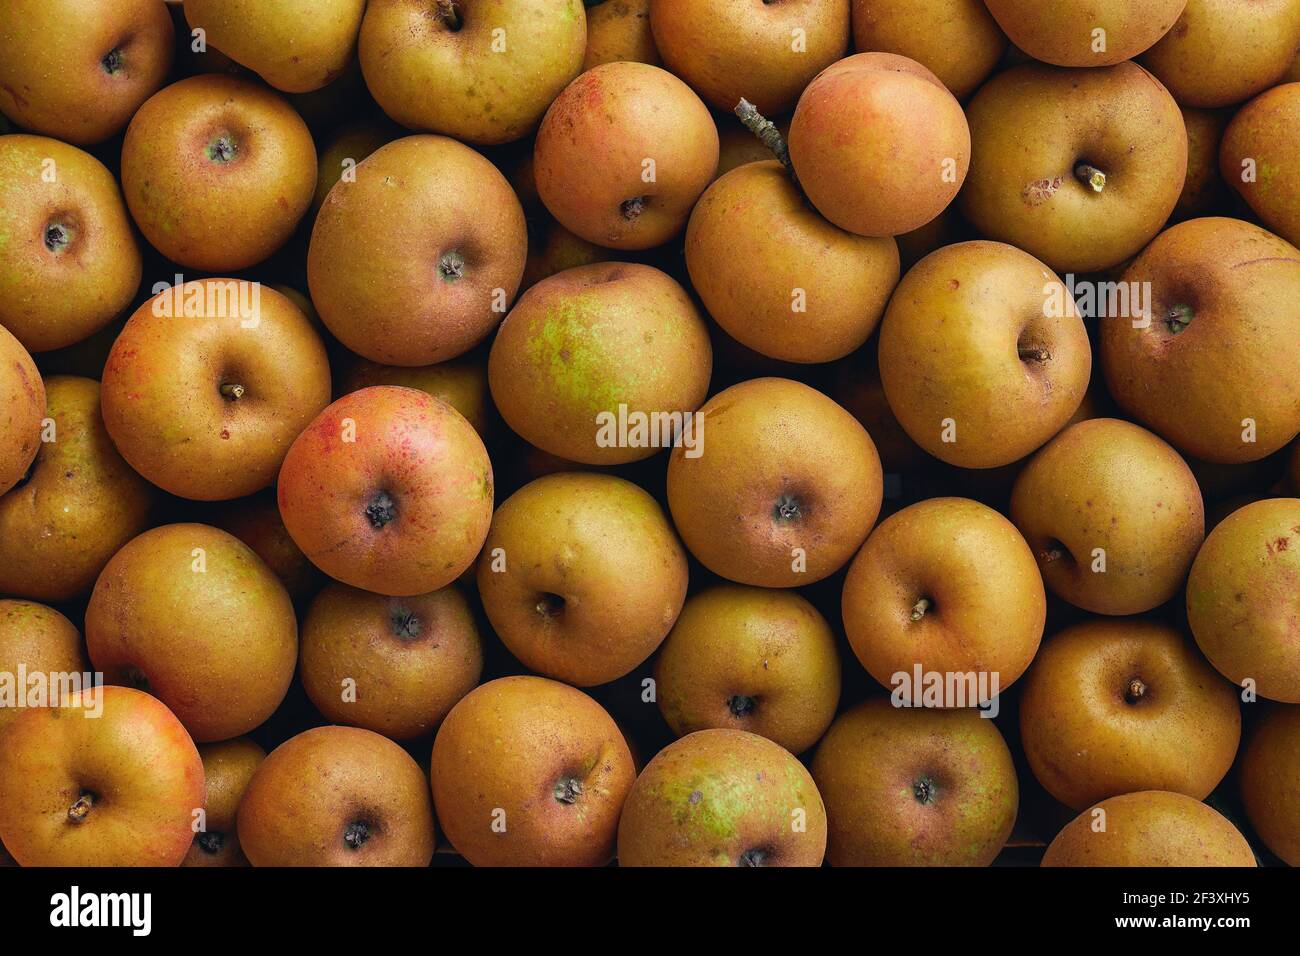 Heirloom reinette apples. An apple of rustic appearance that is very authentic and rich in flavors. Stock Photo